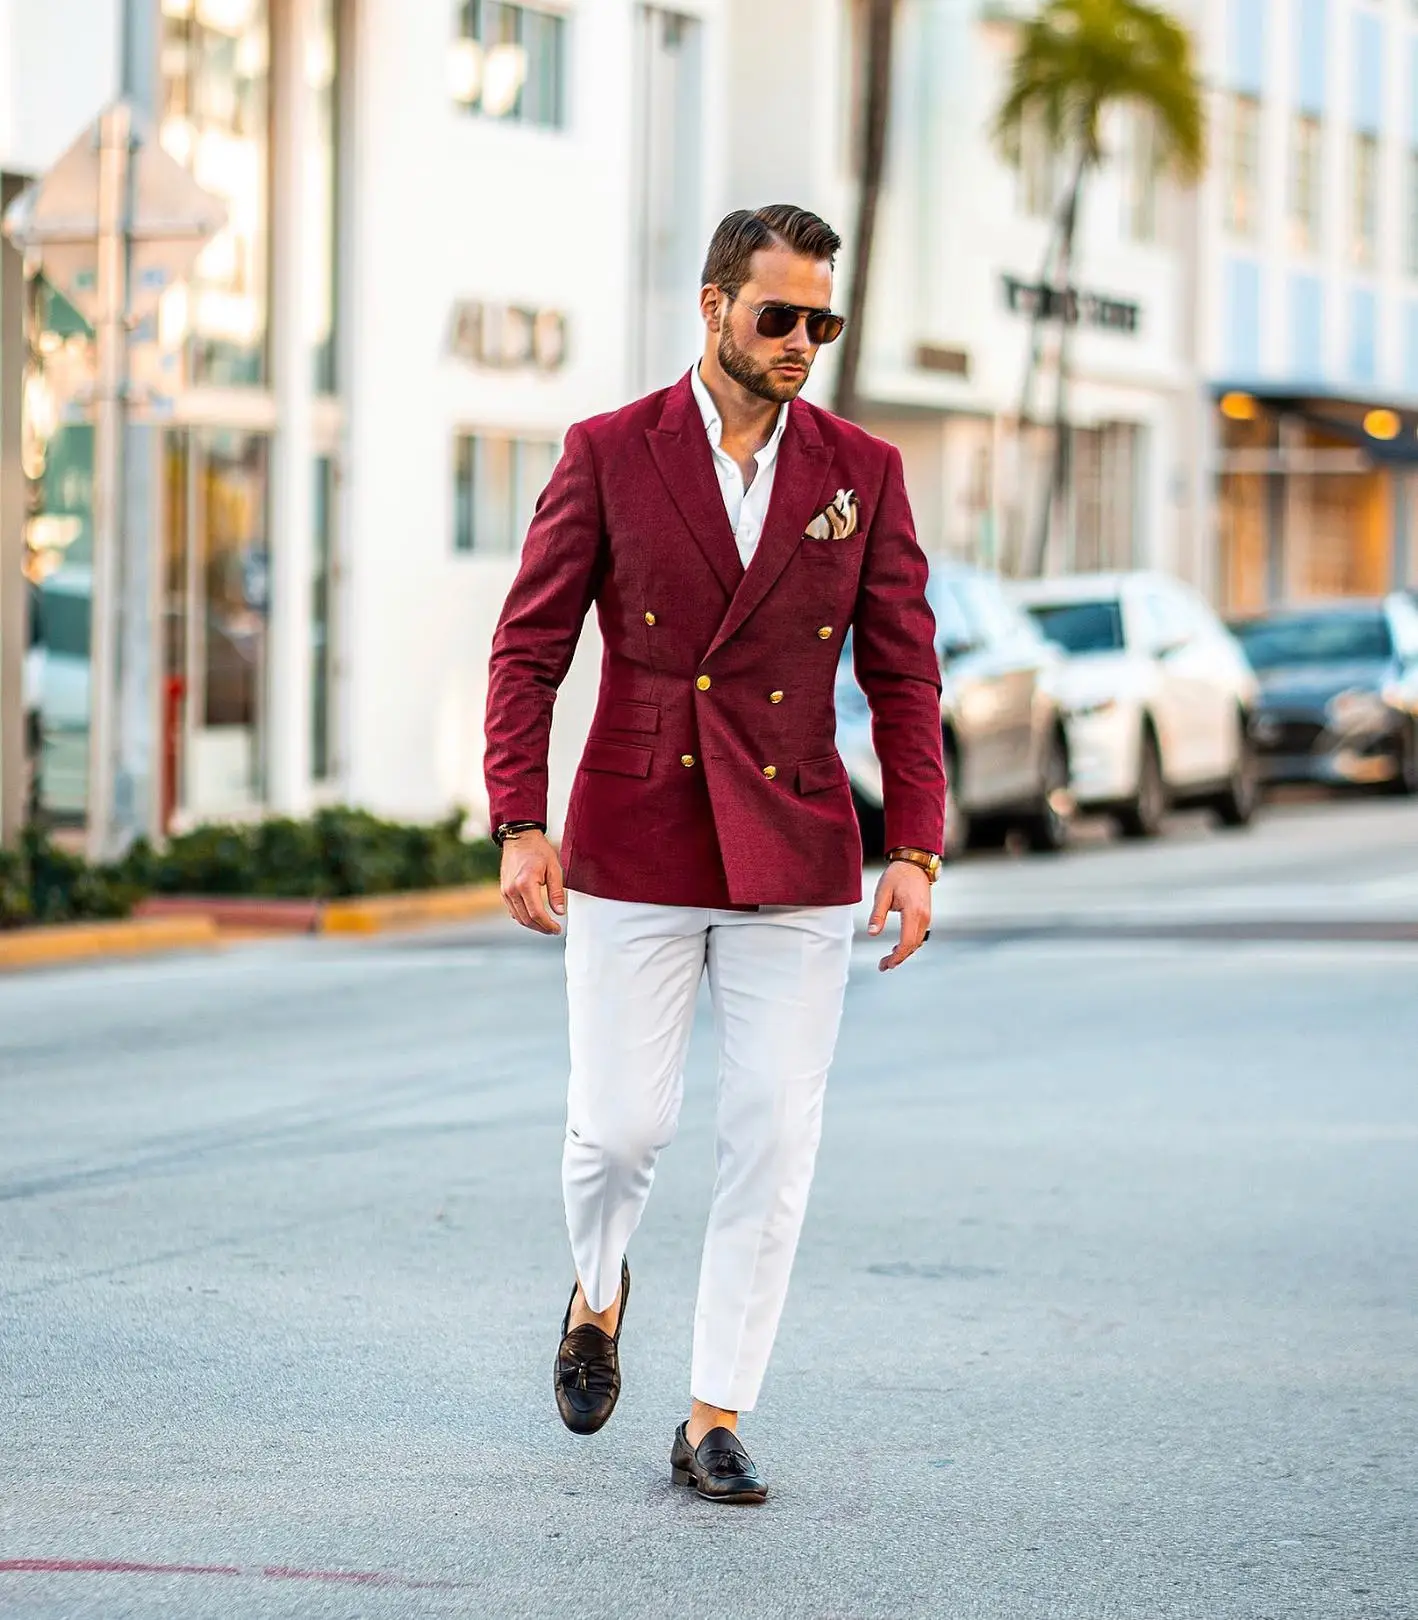 What To Wear With Maroon Pants Guys? 11 Outfit Ideas With Maroon Pants